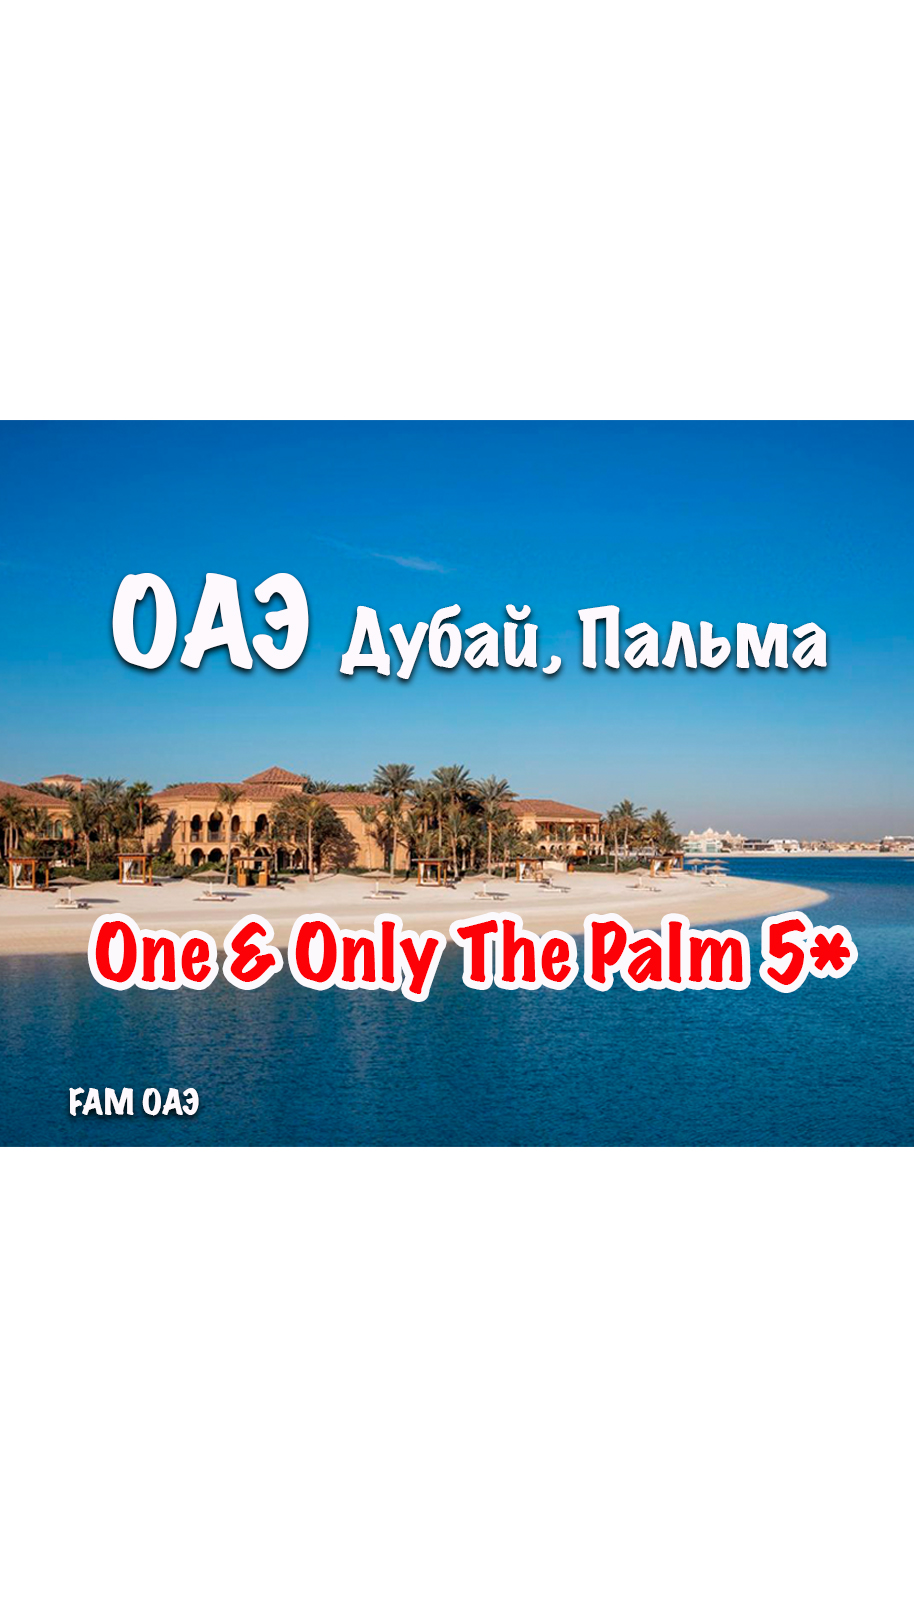 One and Only The Palm (ОАЭ, Дубай, Пальма)